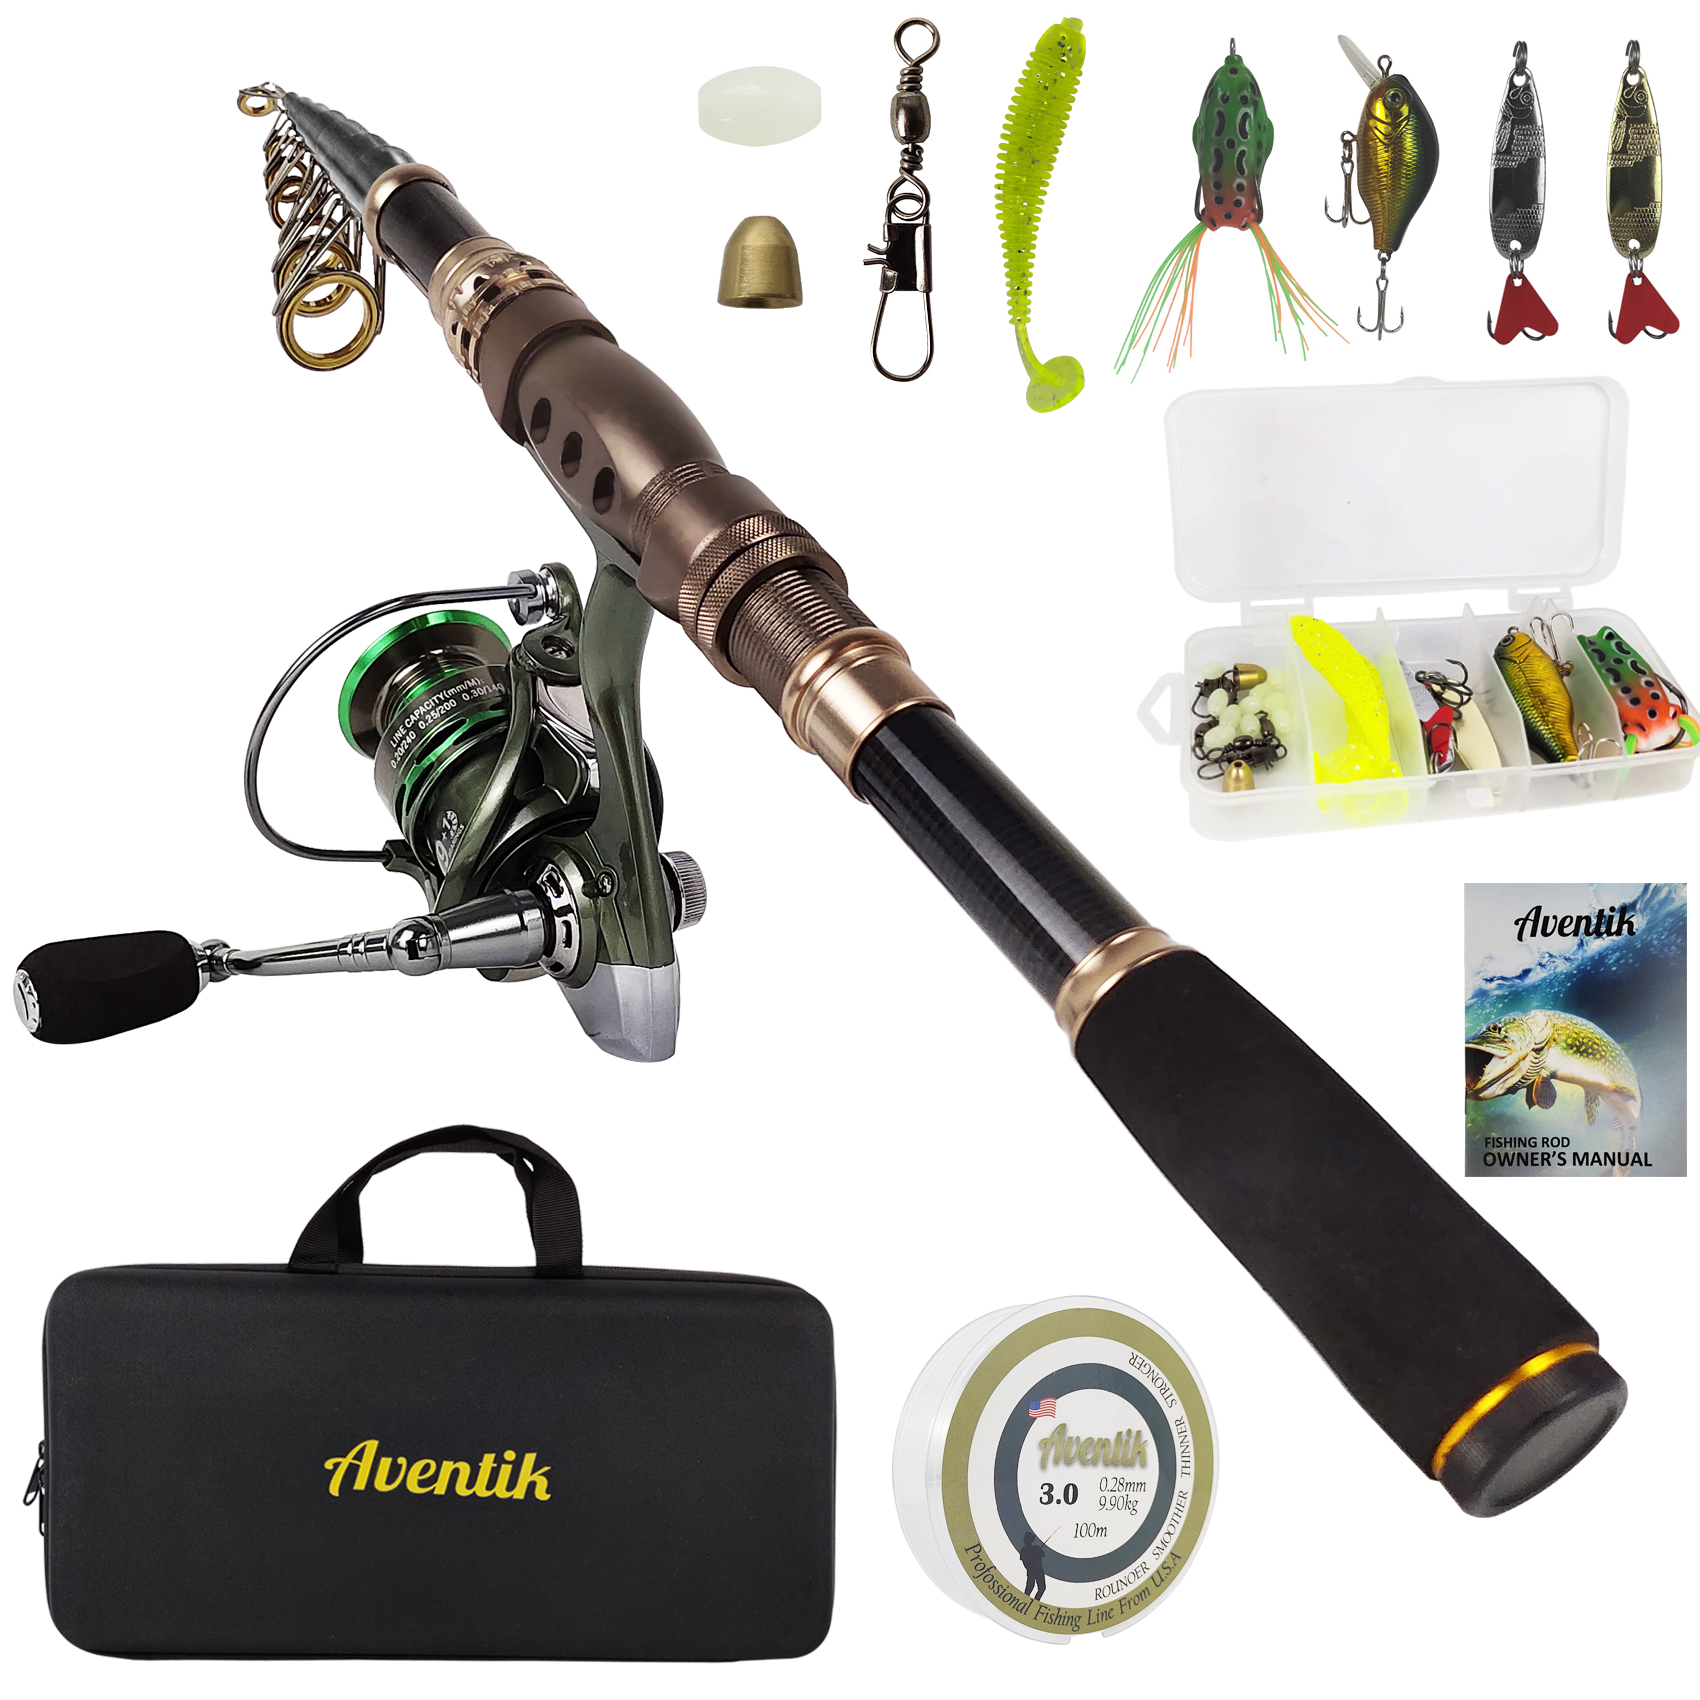 Fishing Rod Kit, Carbon Fiber Telescopic Fishing Rod and Reel Combo with  Spinning Reel, Line, Bionic Bait, Hooks and Carrier Bag, Fishing Gear Set  for Beginner Adults Saltwater Freshwater, Spinning Combos 